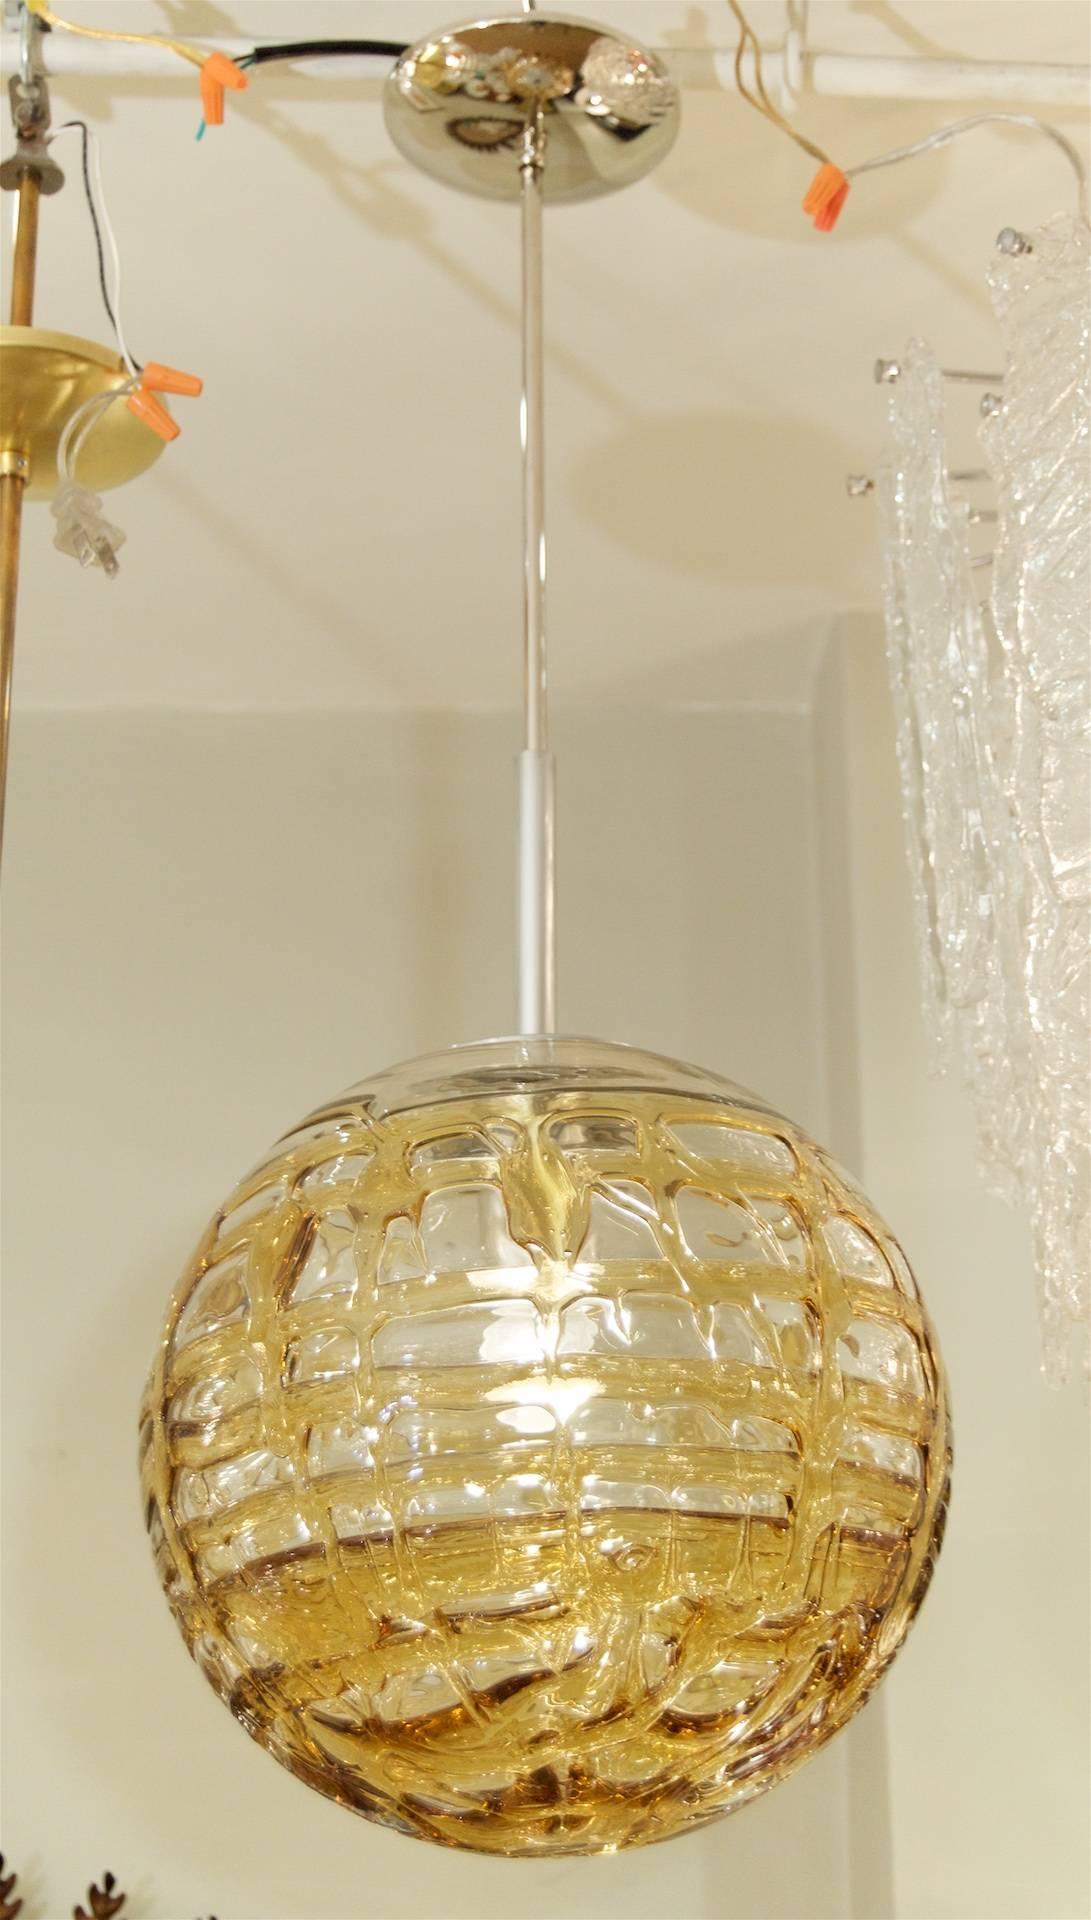 Fantastic Doria pendant will complement all decors. Heavy textured wave surface glass with gold tints infused in the waves, variegated from clear areas.

Takes a single medium base bulb up to 100 watts, new wiring. Please know height listed is of